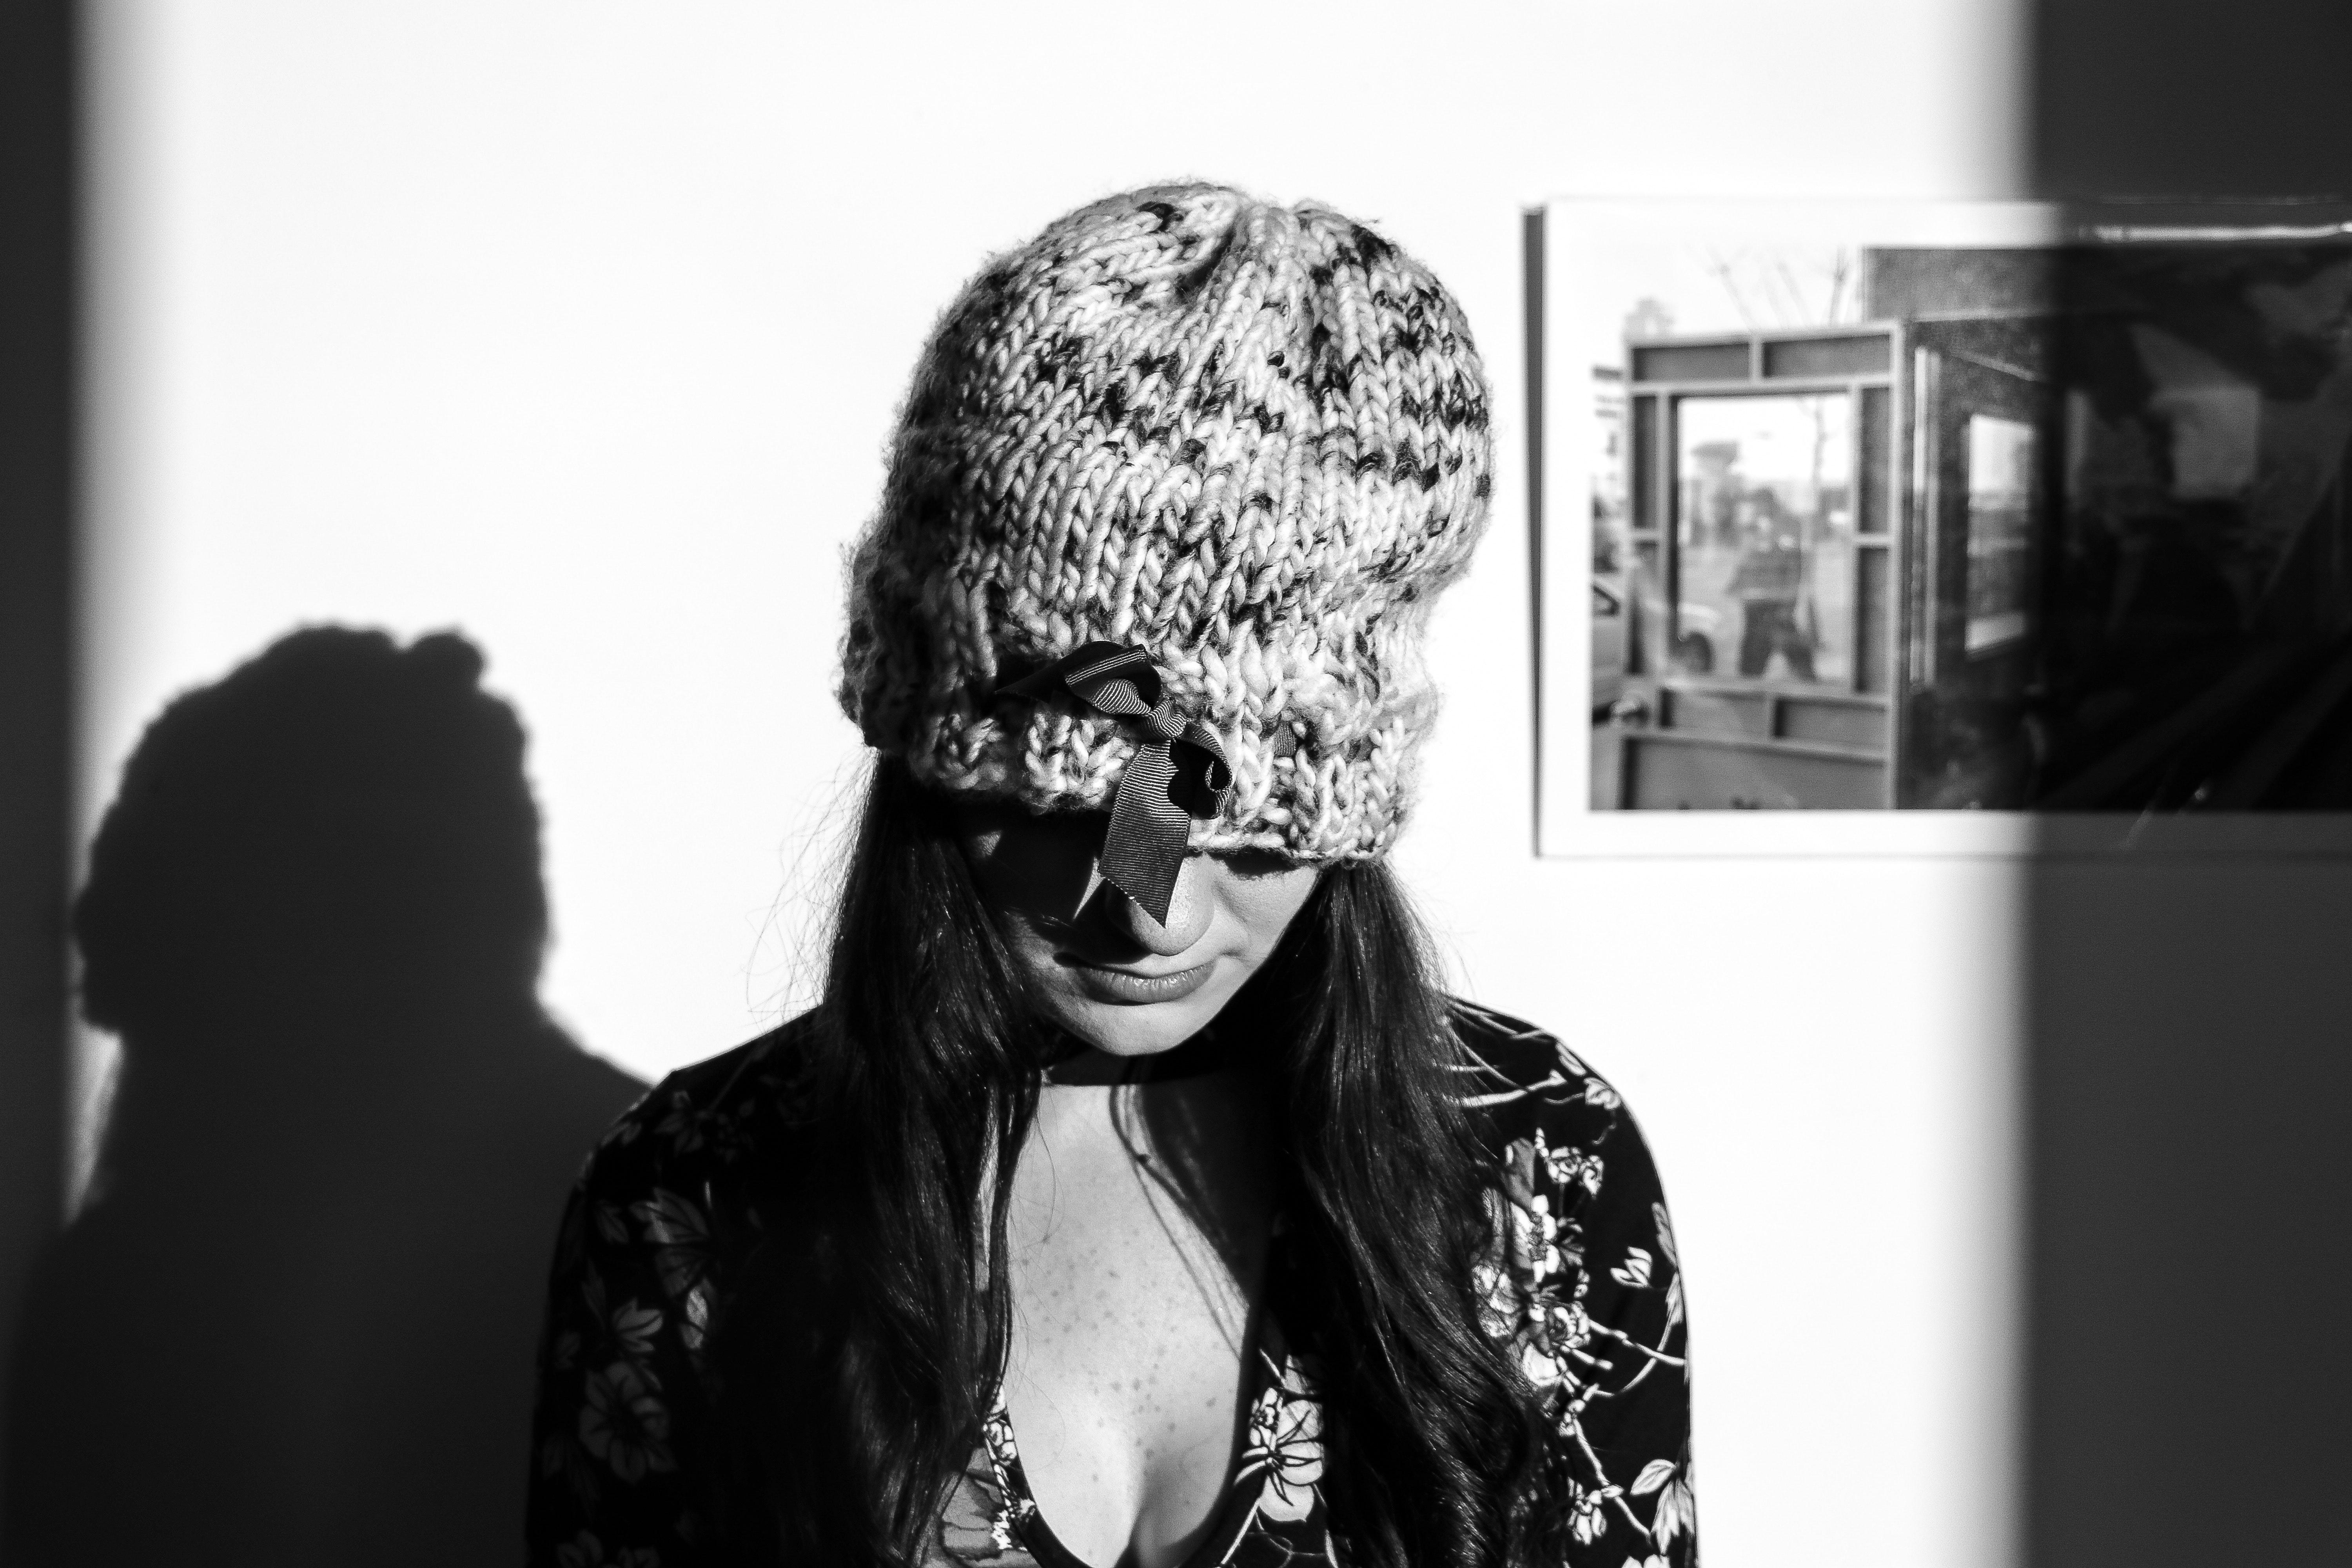 Greyscale photo of woman wearing knitted hat and floral long-sleeved top